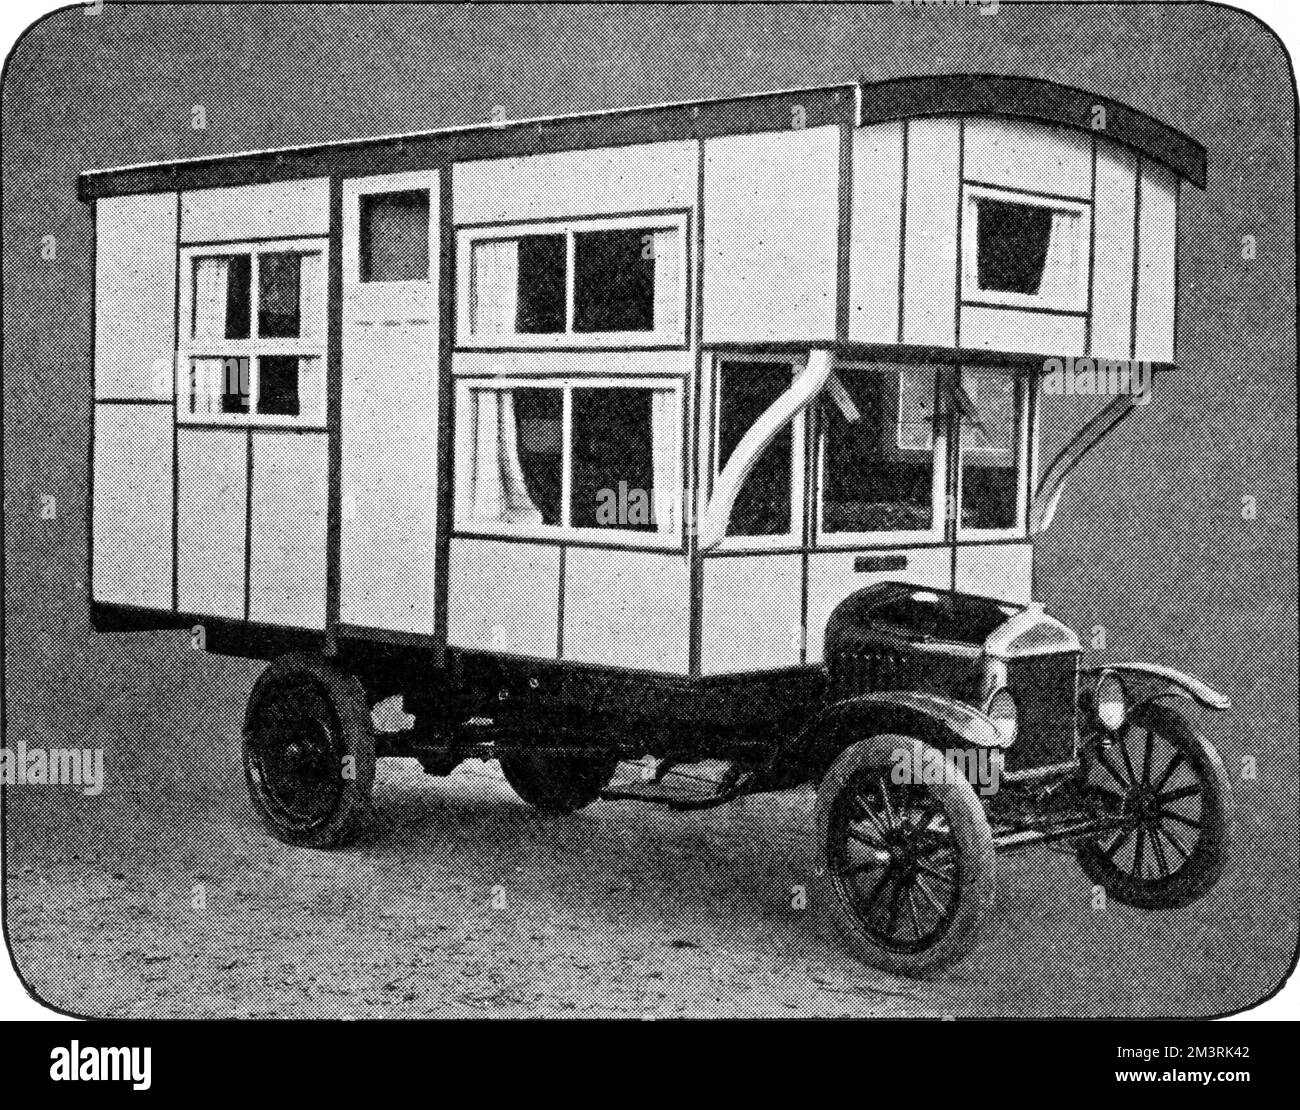 A caravan, designed to look as homely as possible, produced by the Uplands Motor Company.  1927 Stock Photo